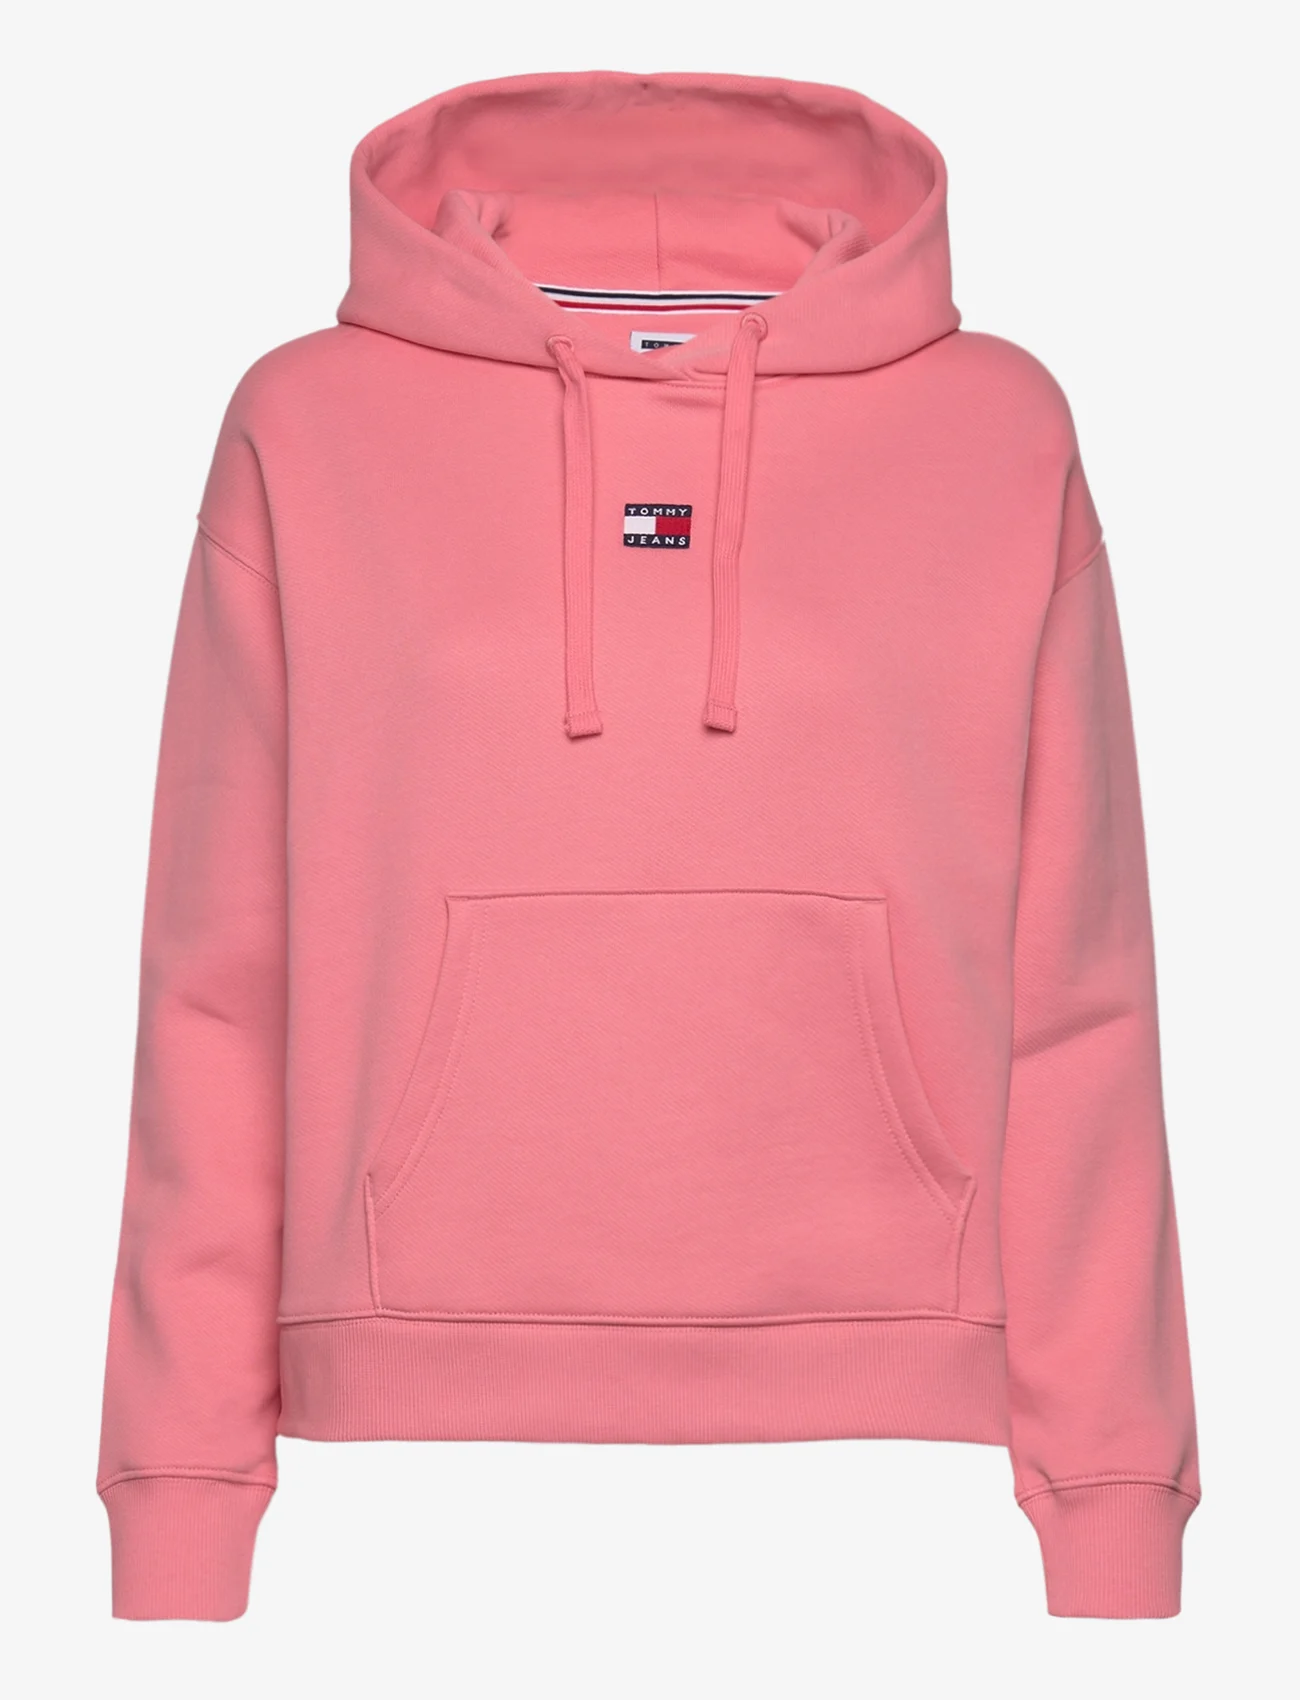 Tommy Jeans - TJW BXY BADGE HOODIE - hettegensere - tickled pink - 0